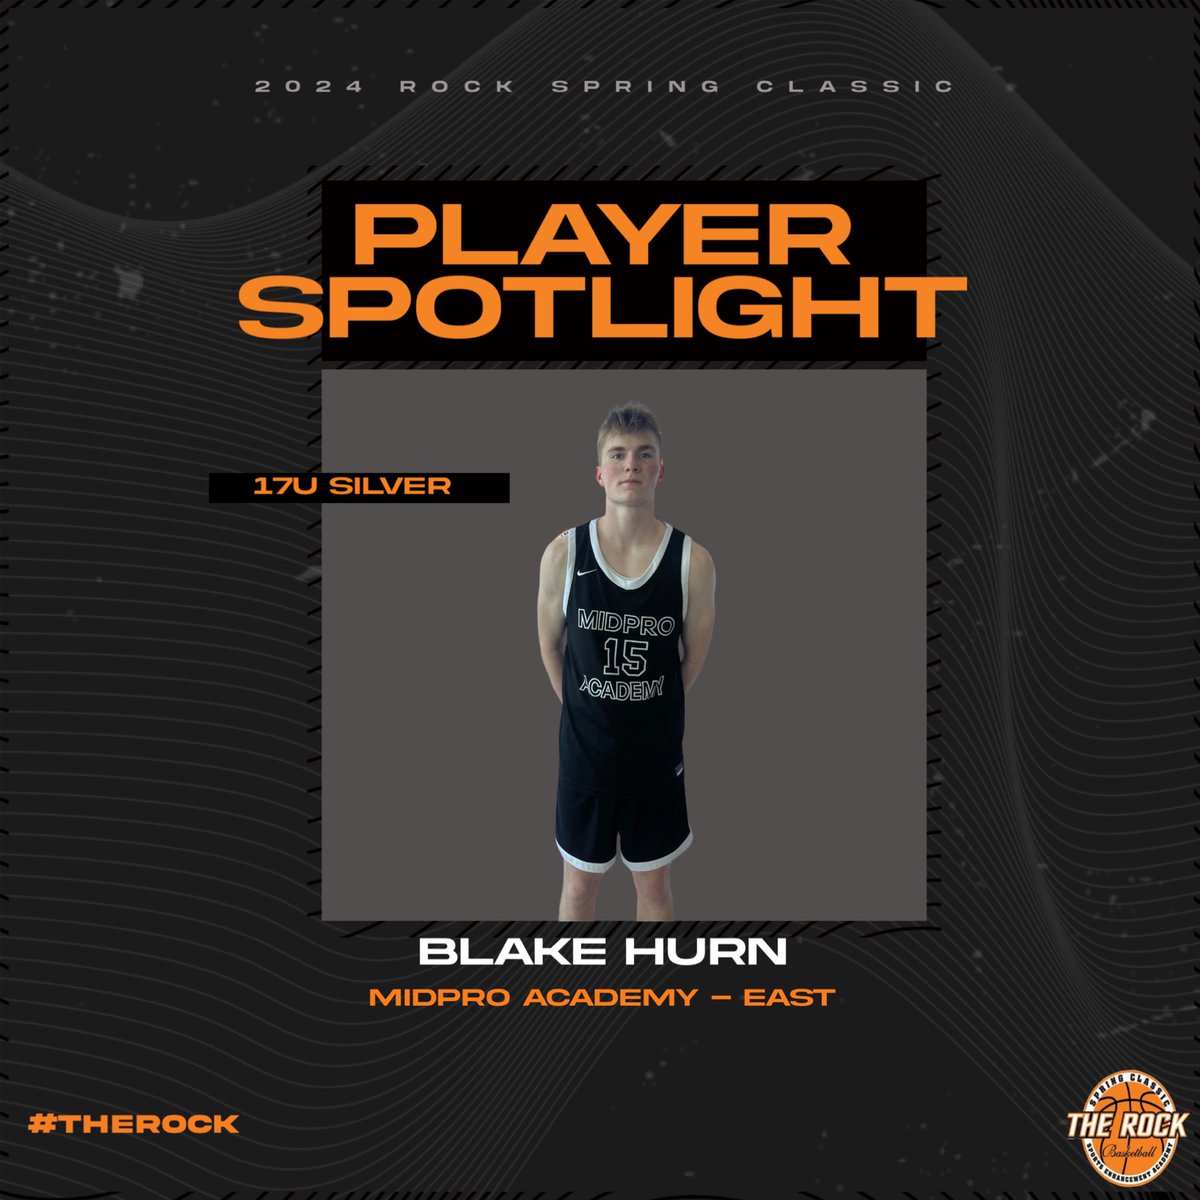 🚨PLAYER SPOTLIGHT🚨 2025 Blake Hurn scored 19pts in @MidProAcademy - East tough win over Gallo Sports Center 53-50! #TheROCK